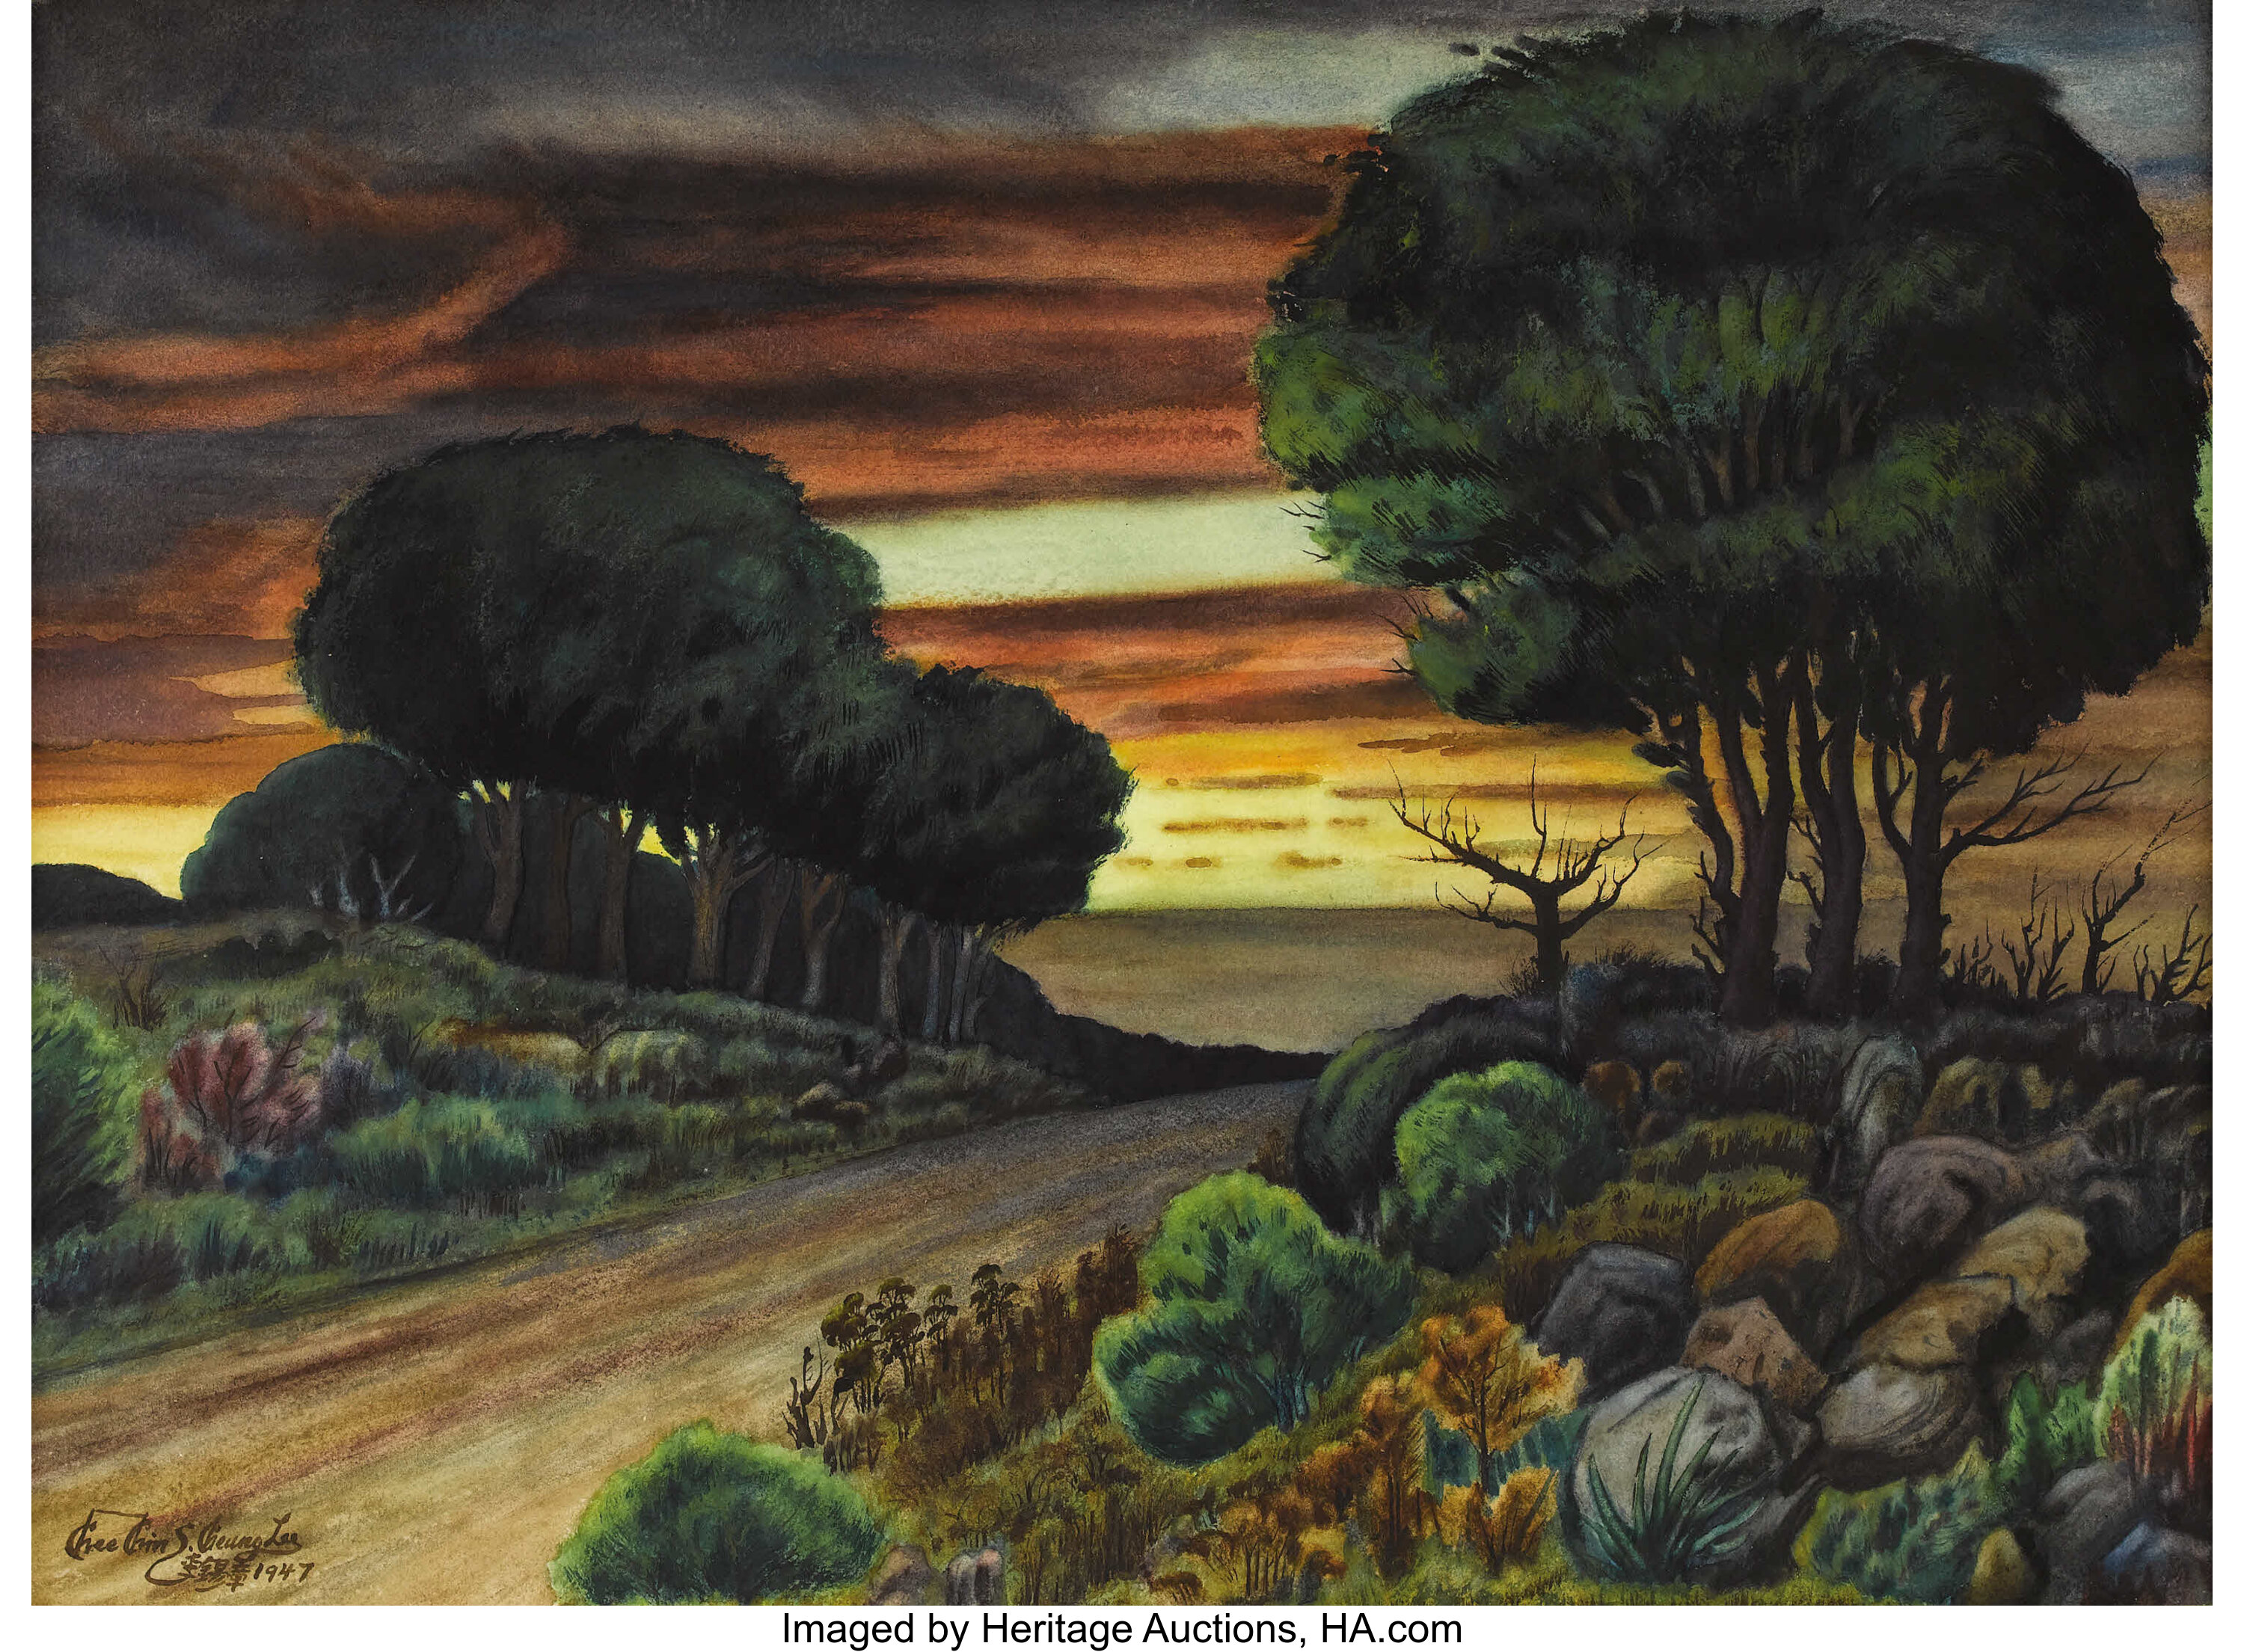 CHEE CHIN S. CHEUNG LEE (Chinese-American 1896-1966). Landscape, | Lot  #23122 | Heritage Auctions